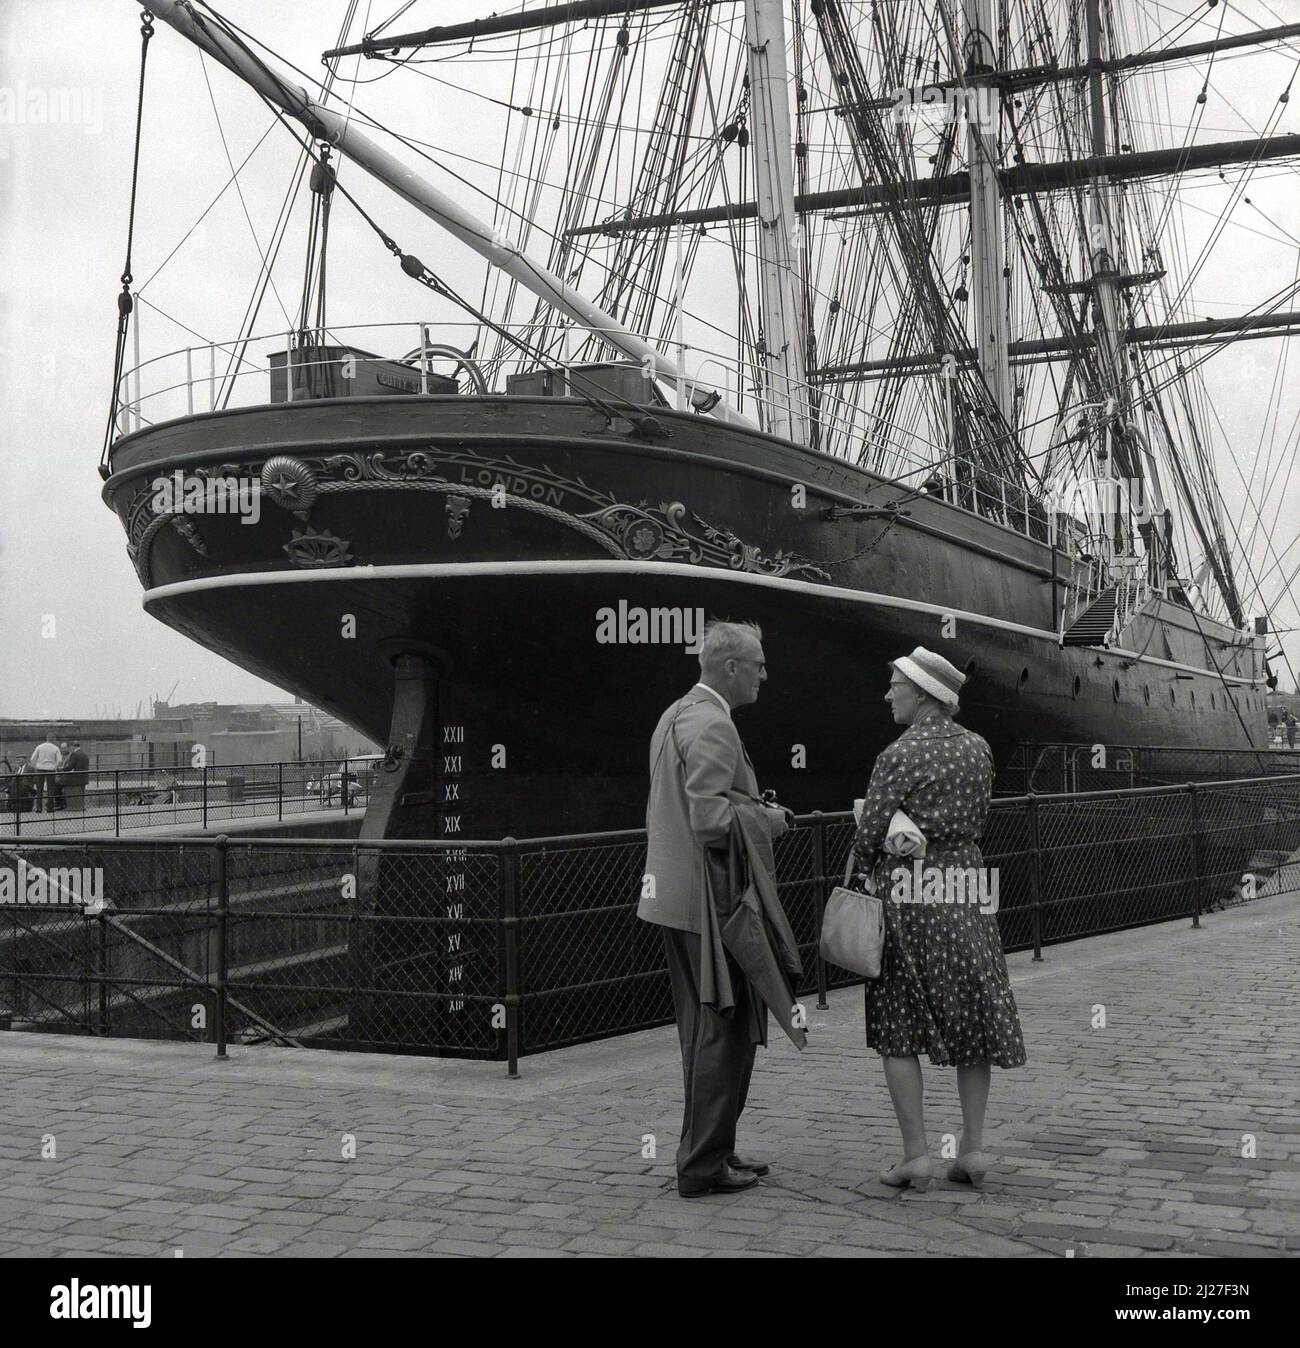 1950s, historical, a gentleman and lady standing by the rear or stern of the sailing ship, the Cutty Sark, Greenwich, London, England, UK. Built in Scotland in 1869 to carry tea back from China, the three-masted clipper ship was famous for its record-breaking passages. Stock Photo